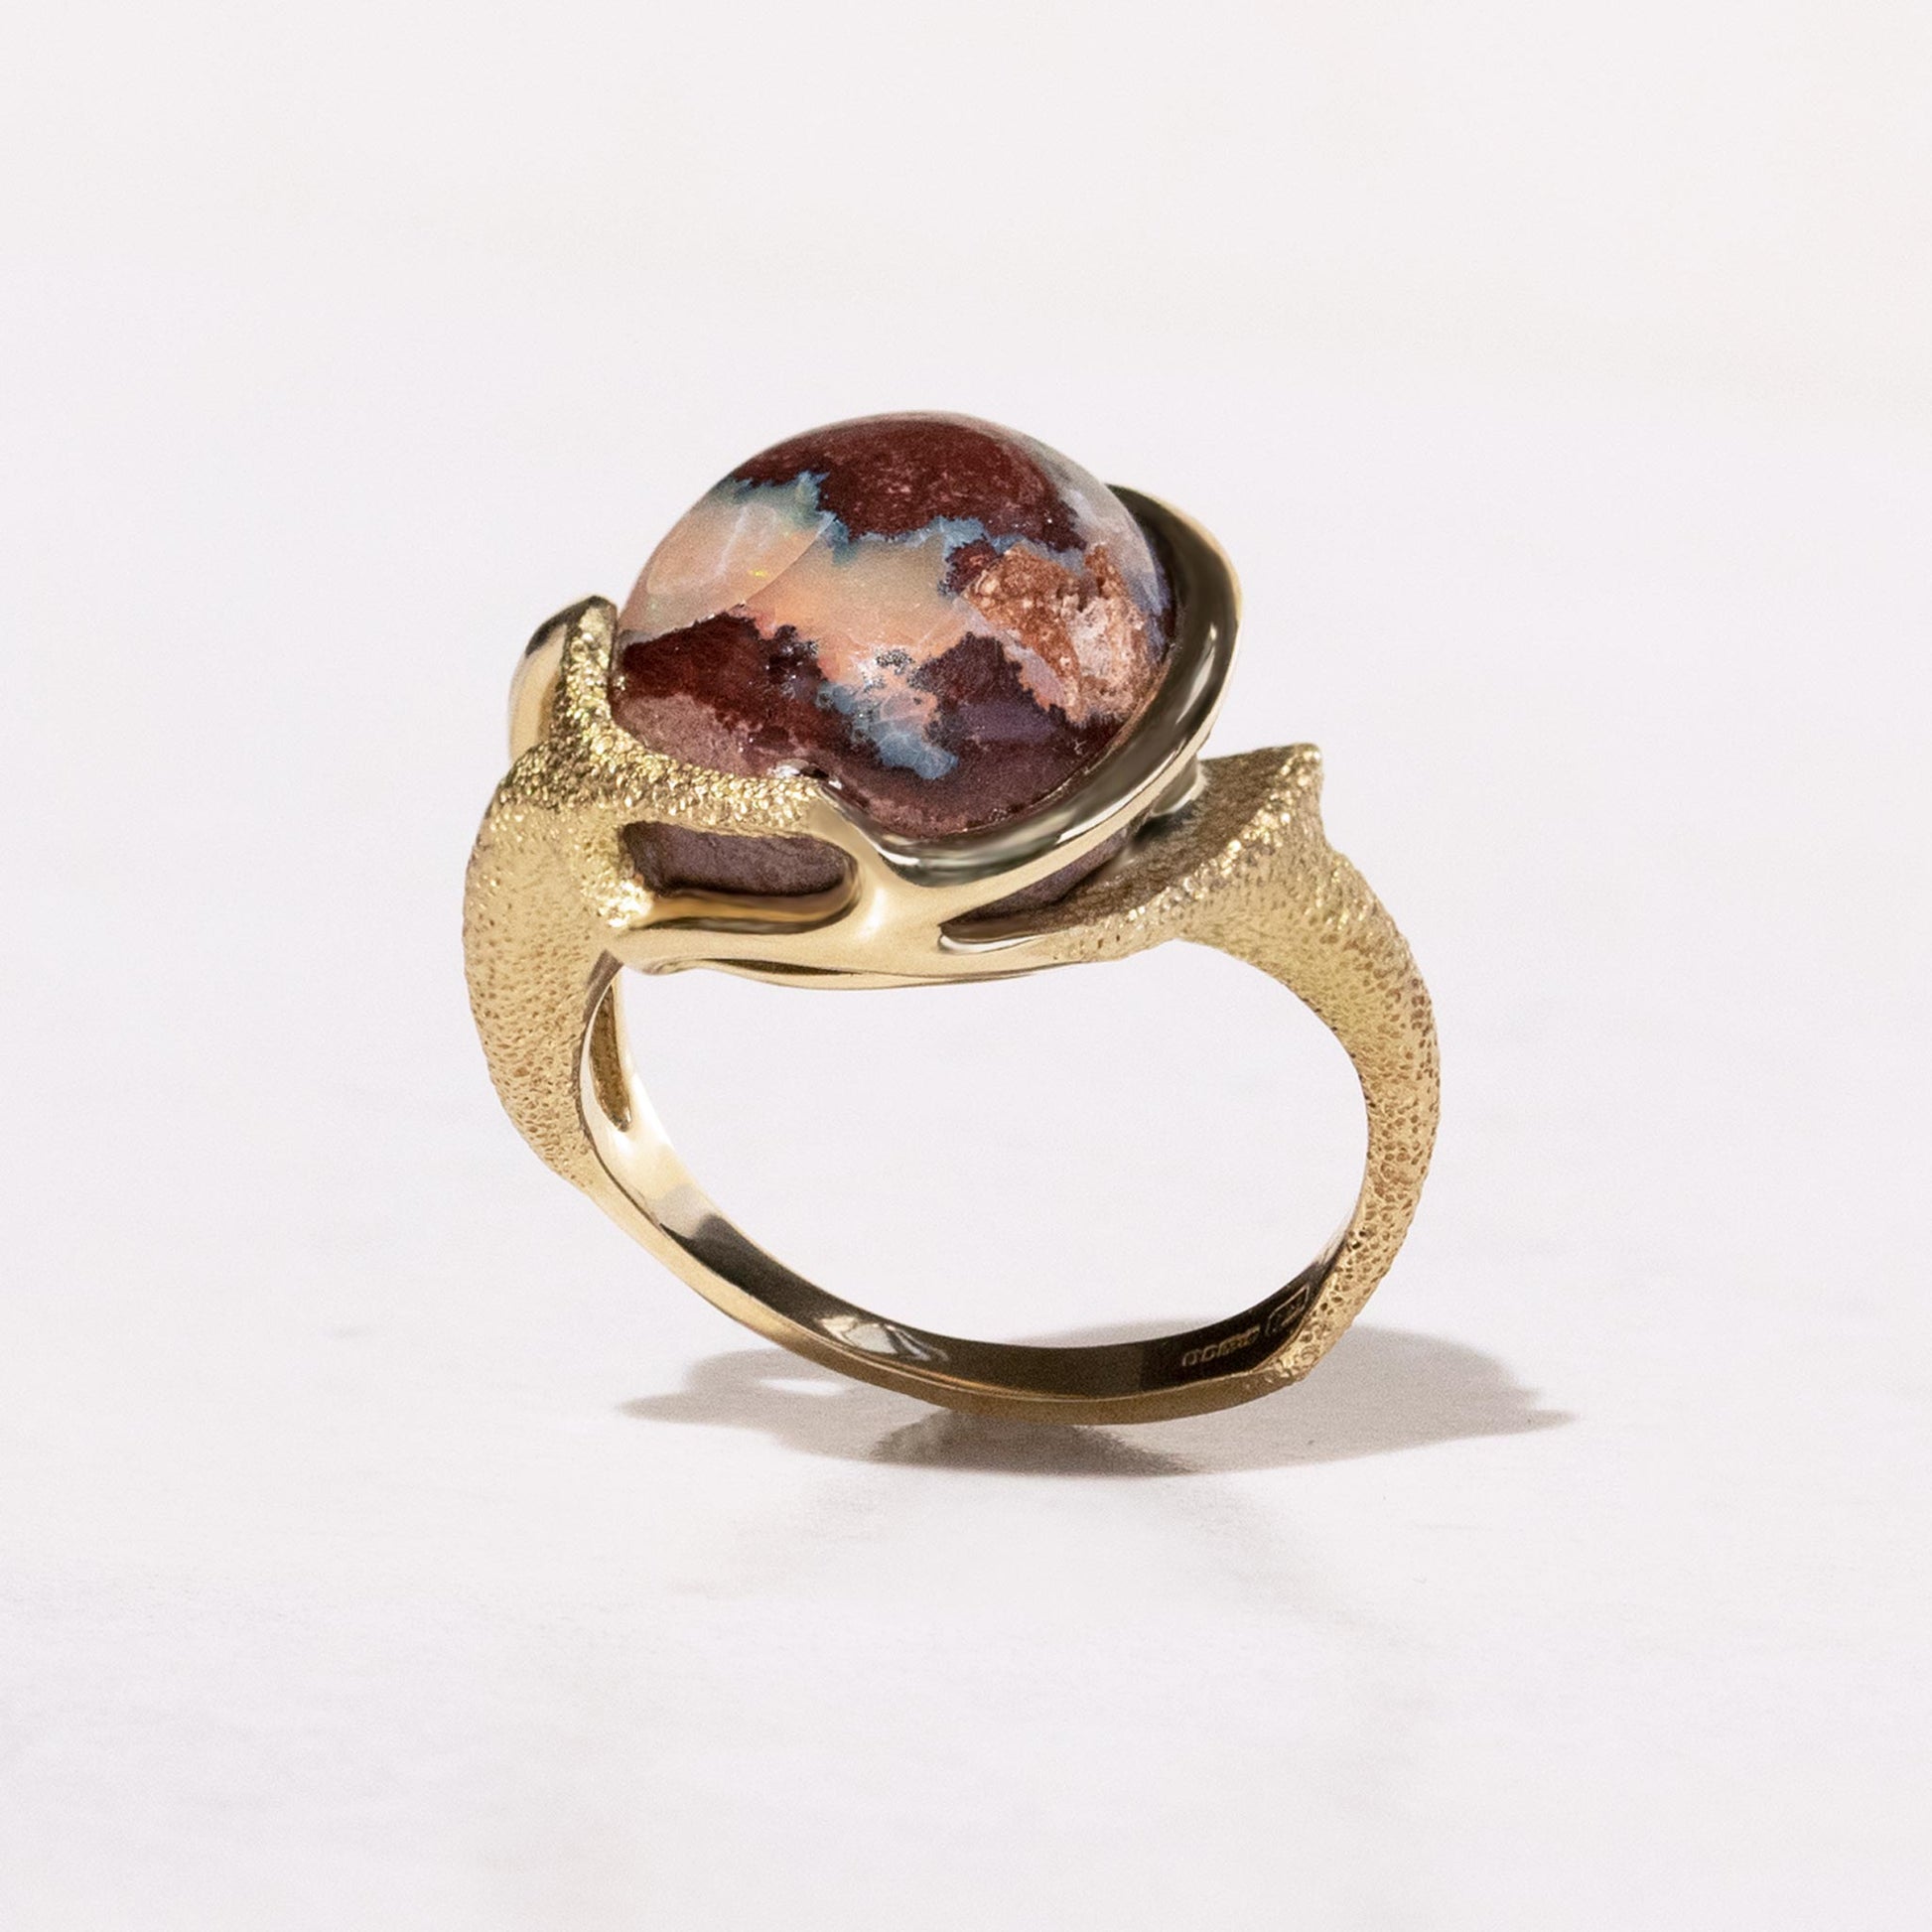 Orme-Brown Contemporary Fine Jewellery Ethical Statement Arrow ring in sustainable recycled 18ct yellow gold and a round Mexican fire opal cabochon (TipToe)